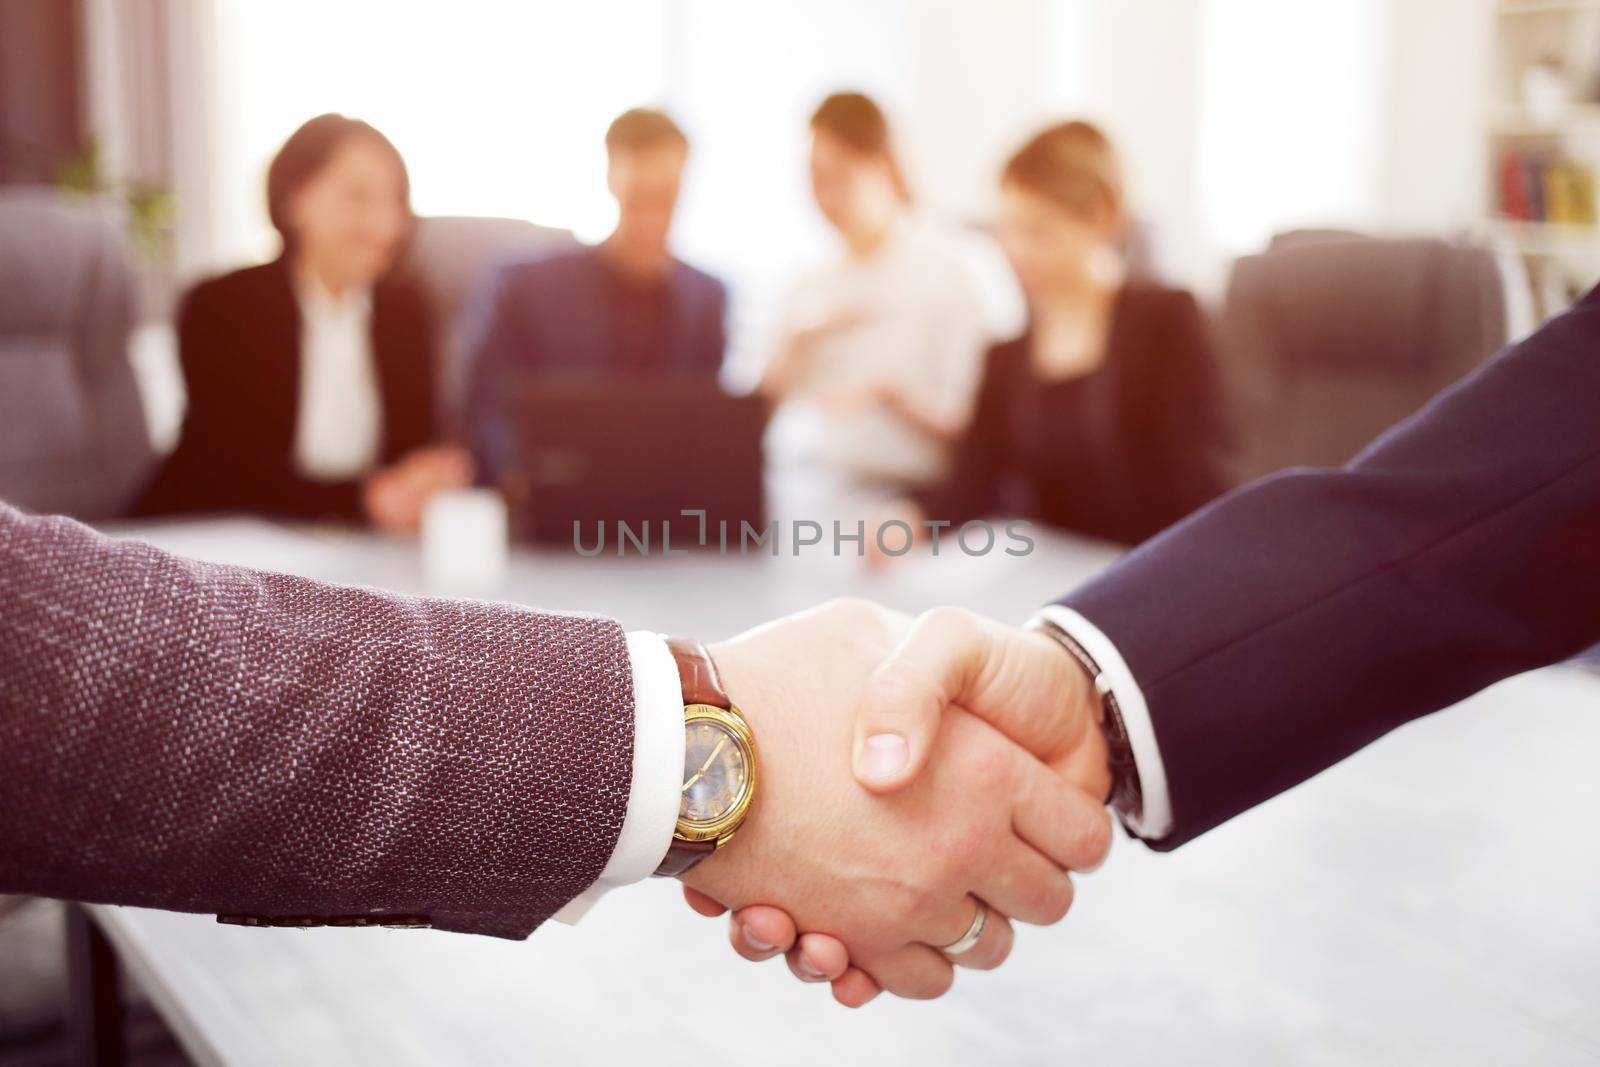 Business people shaking hands finishing a meeting in the background of their work team. 